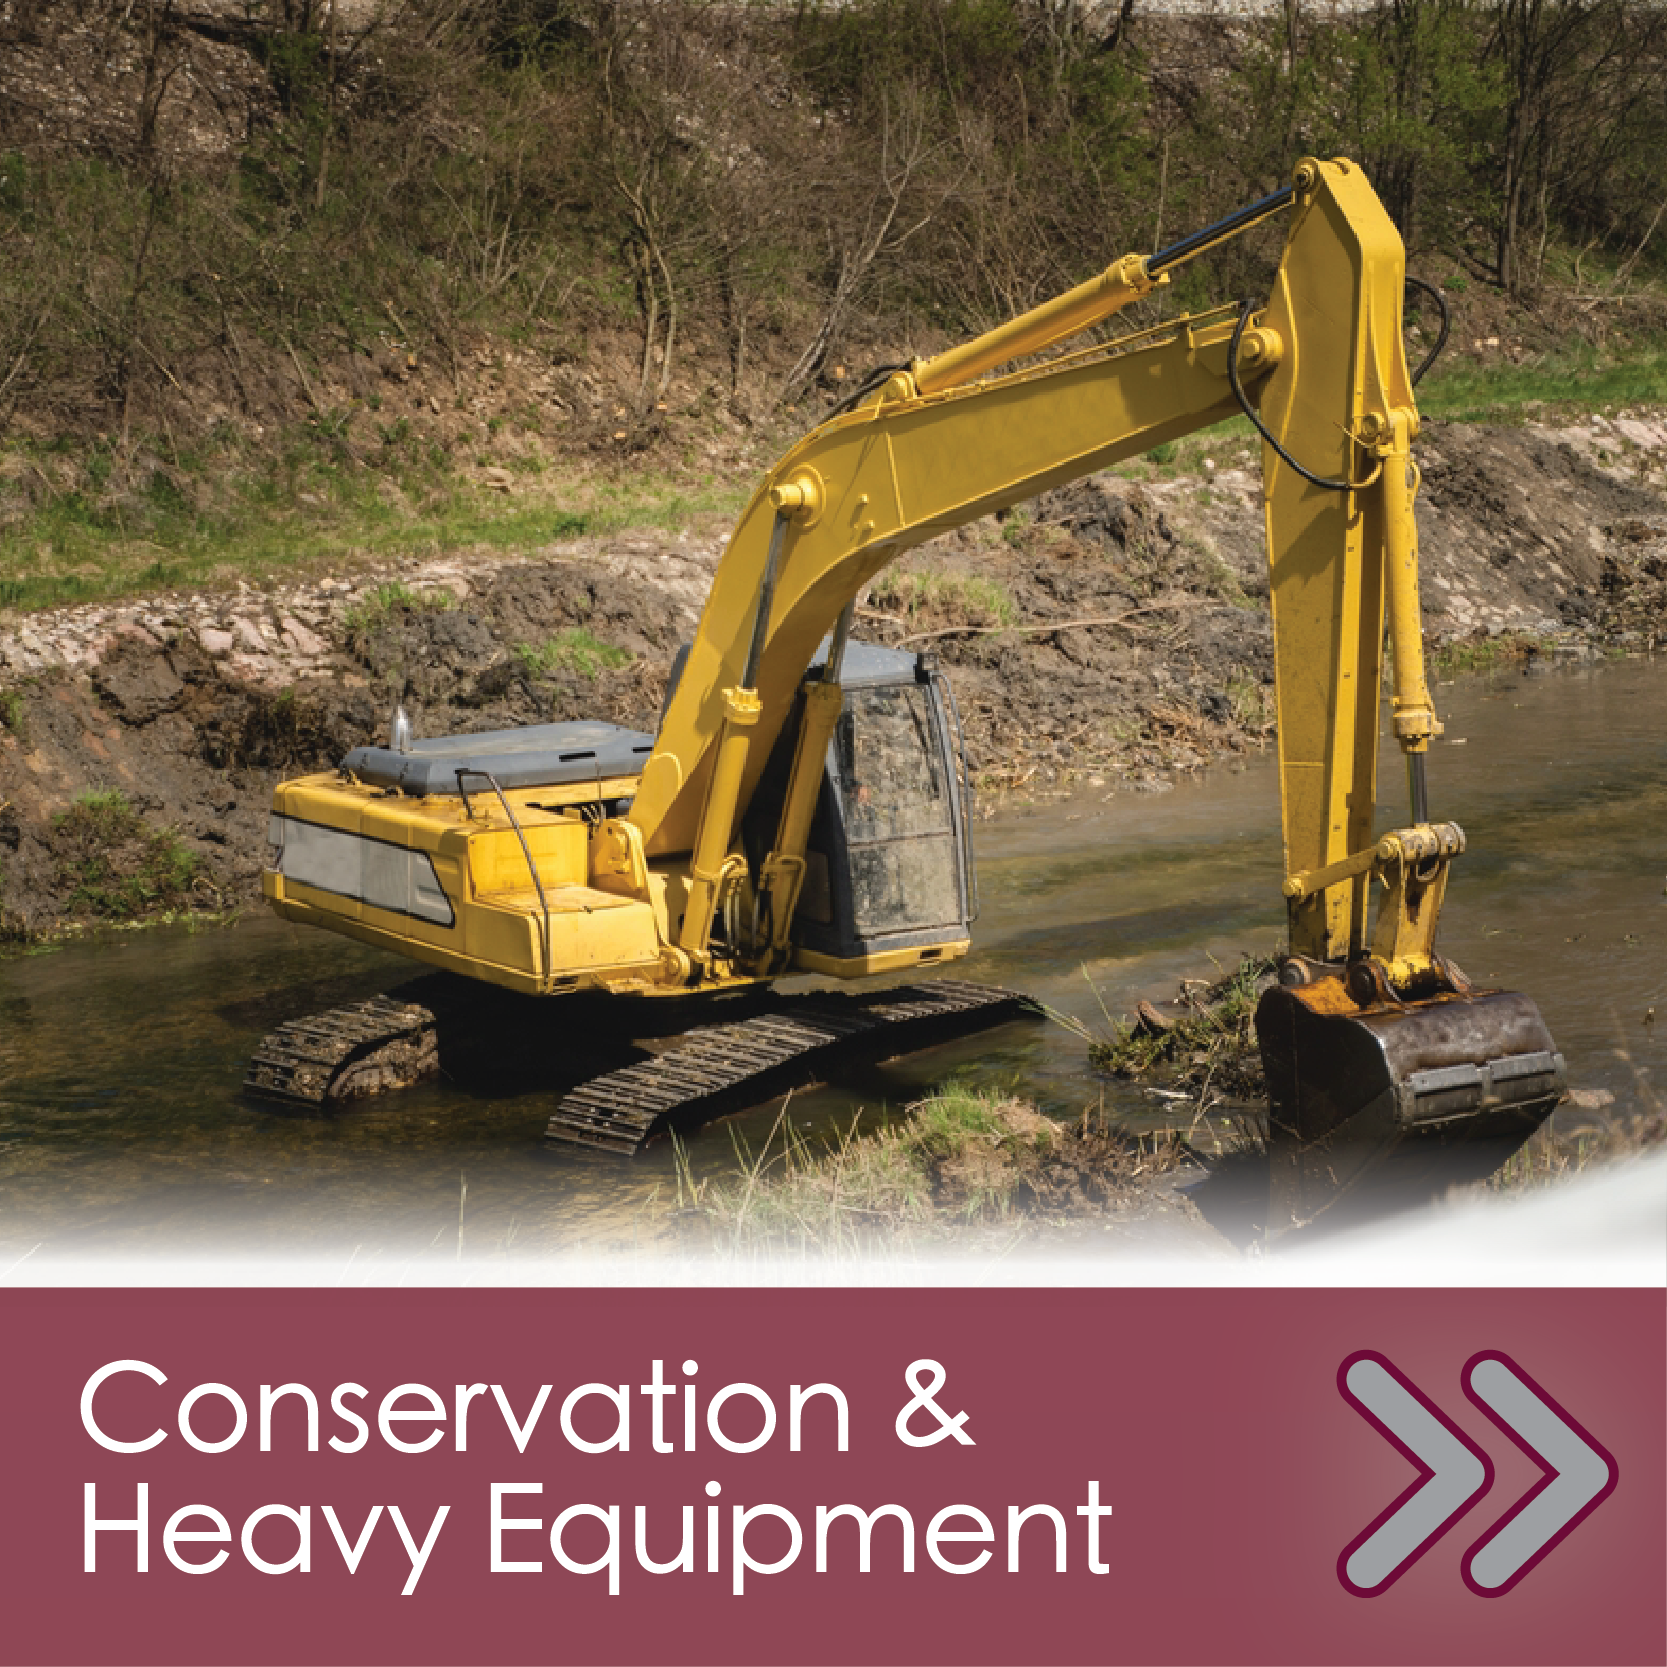 DCMO BOCES Adult Conservation and Heavy Equipment 